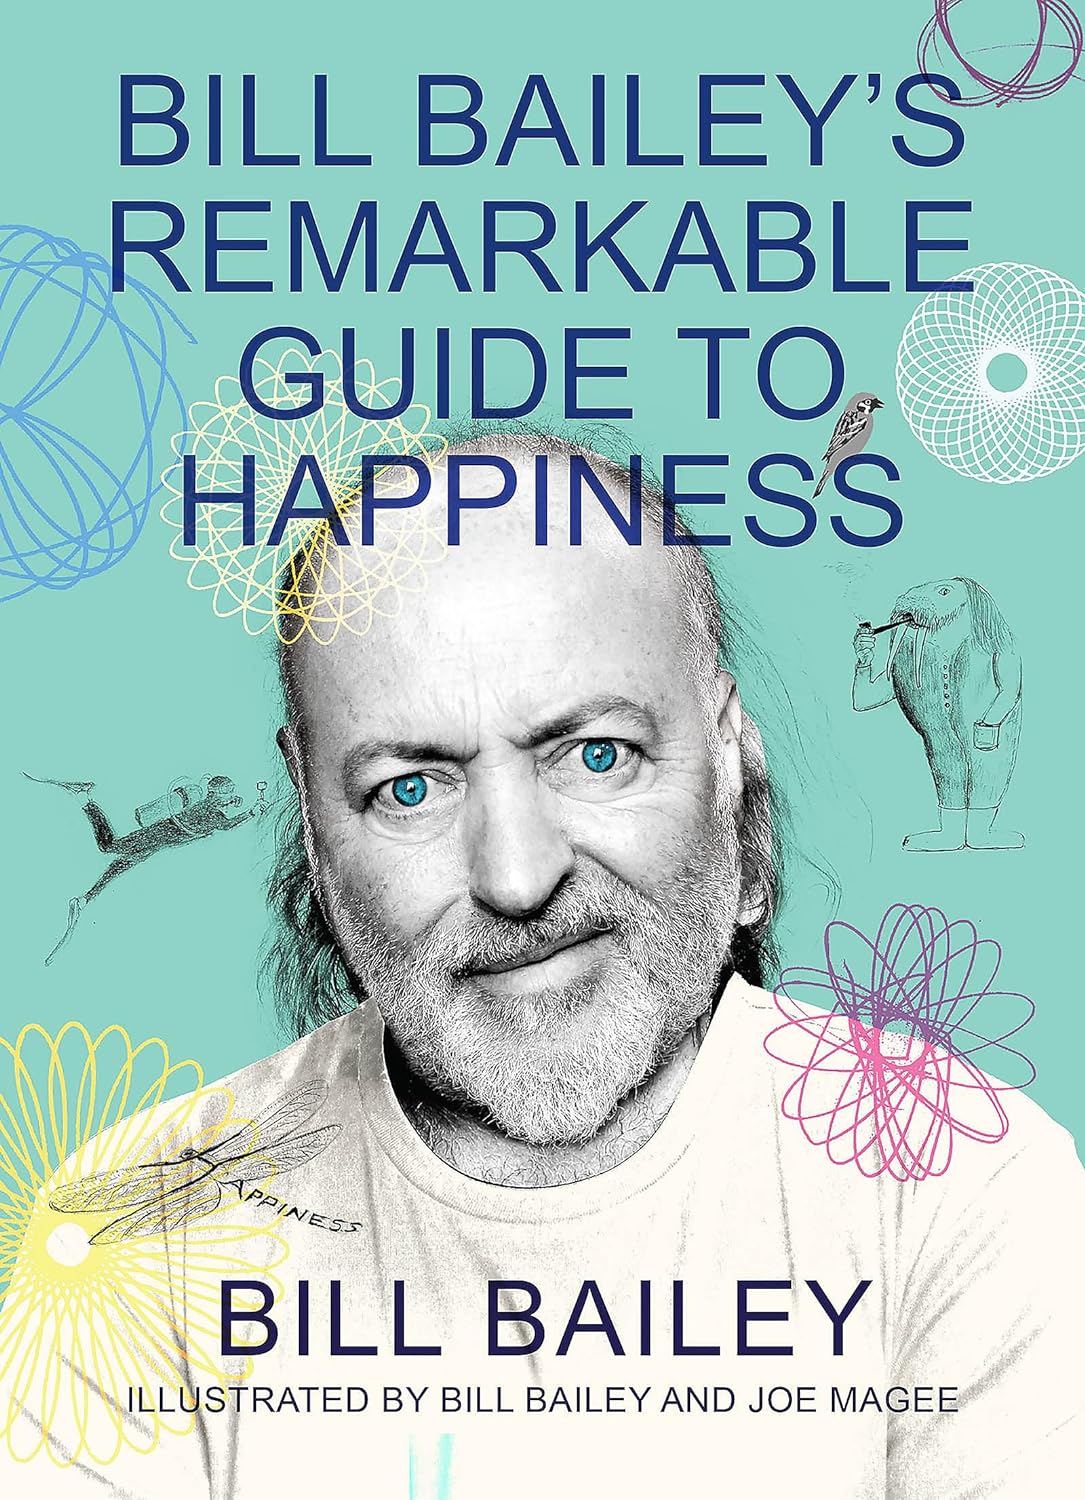 Bill Bailey: Bill Bailey's Remarkable Guide to Happiness (2020, Quercus)